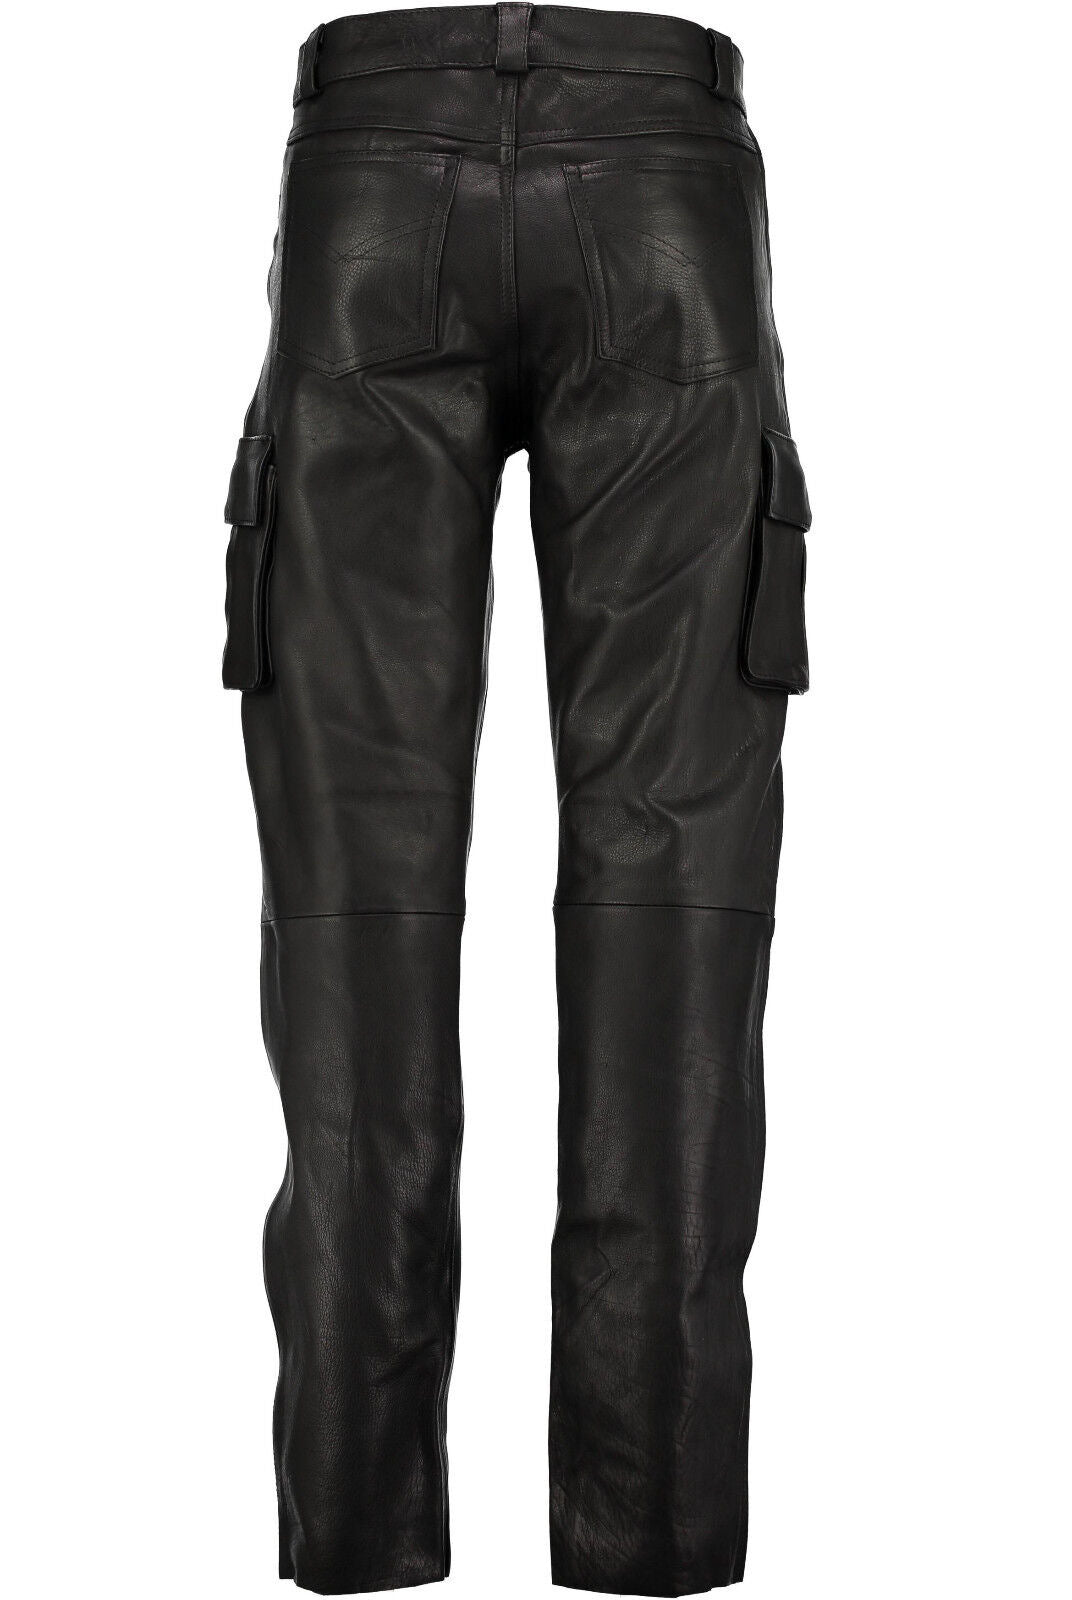 Solid Color Men's PU Leather Casual Leather Pants Trousers